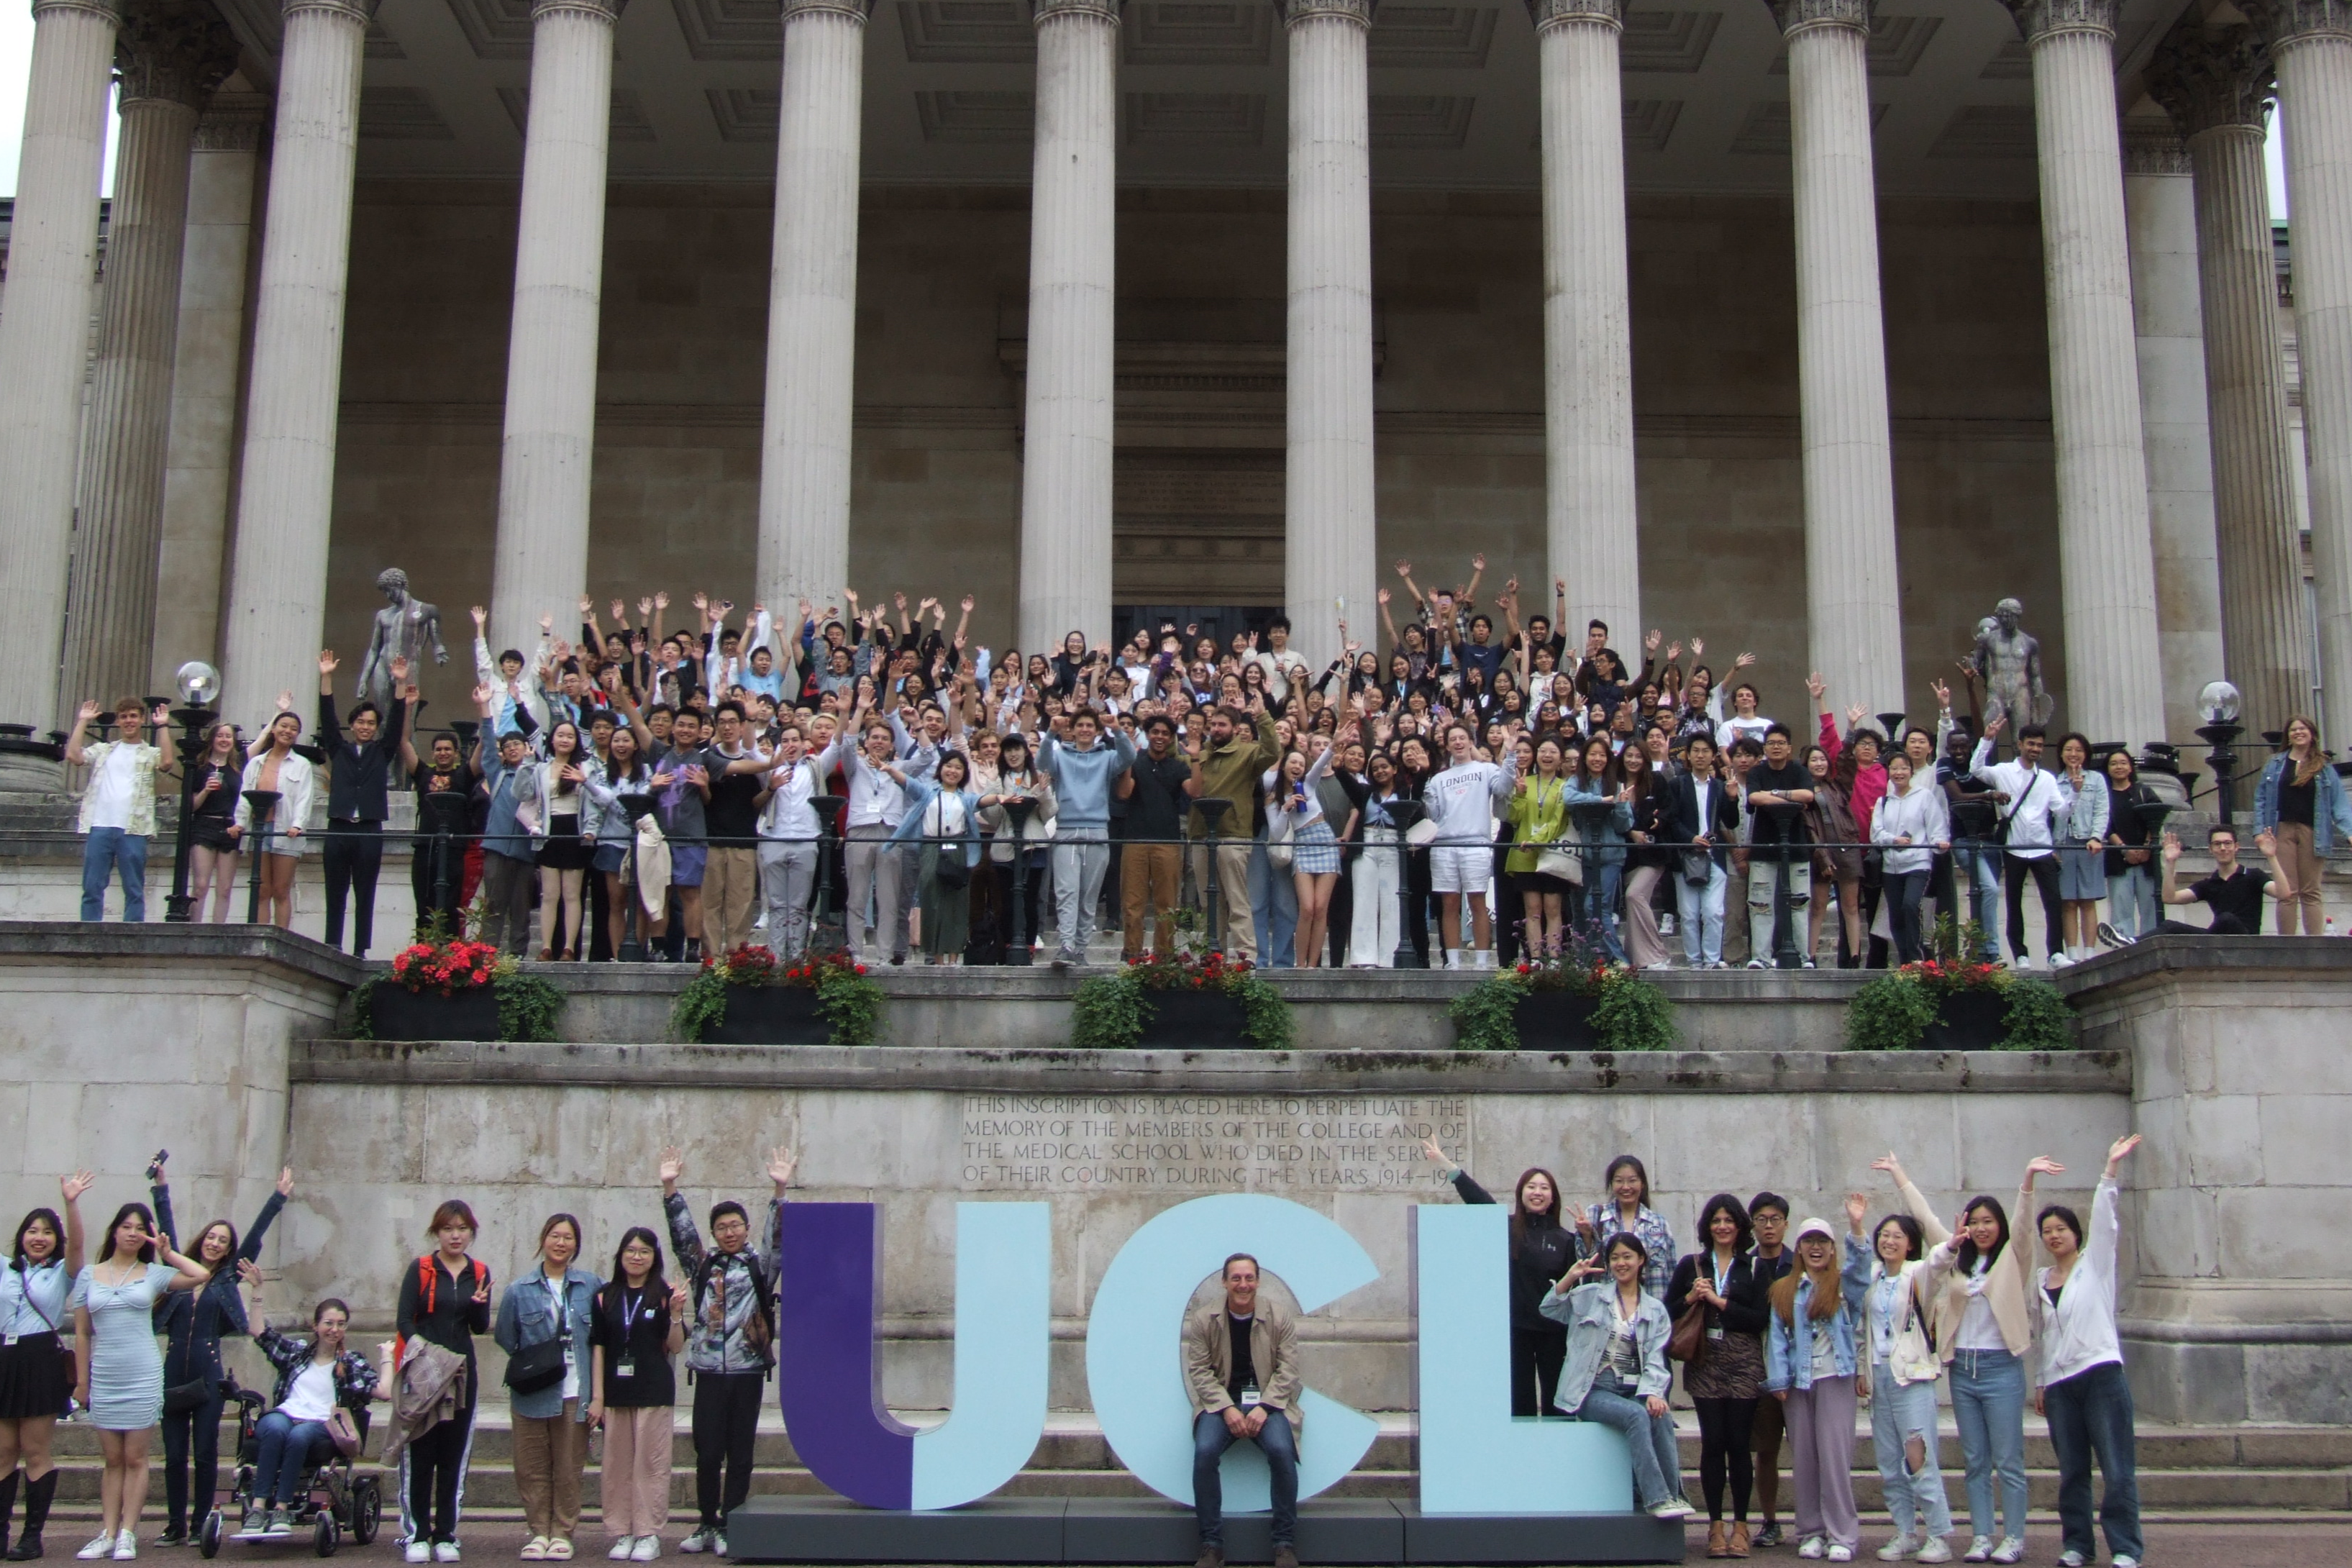 UCL Summer School 2023 on the steps of the Portico Building